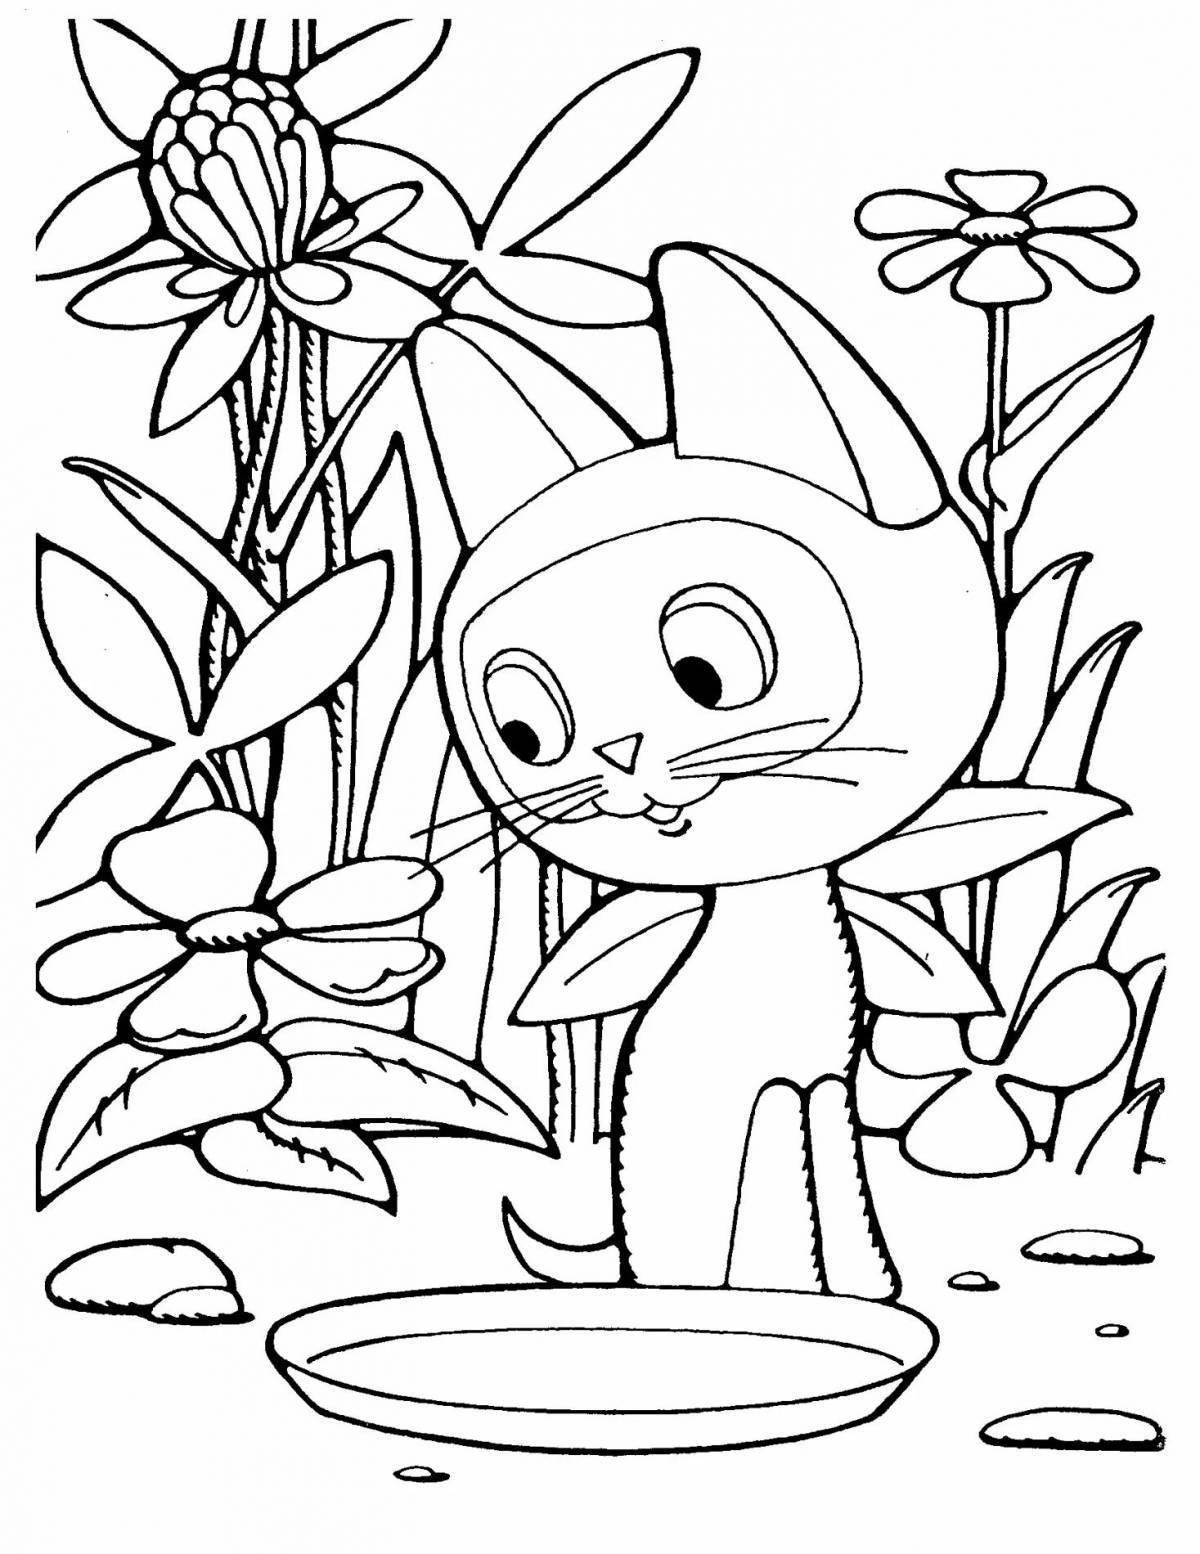 Coloring kitten woof for kids